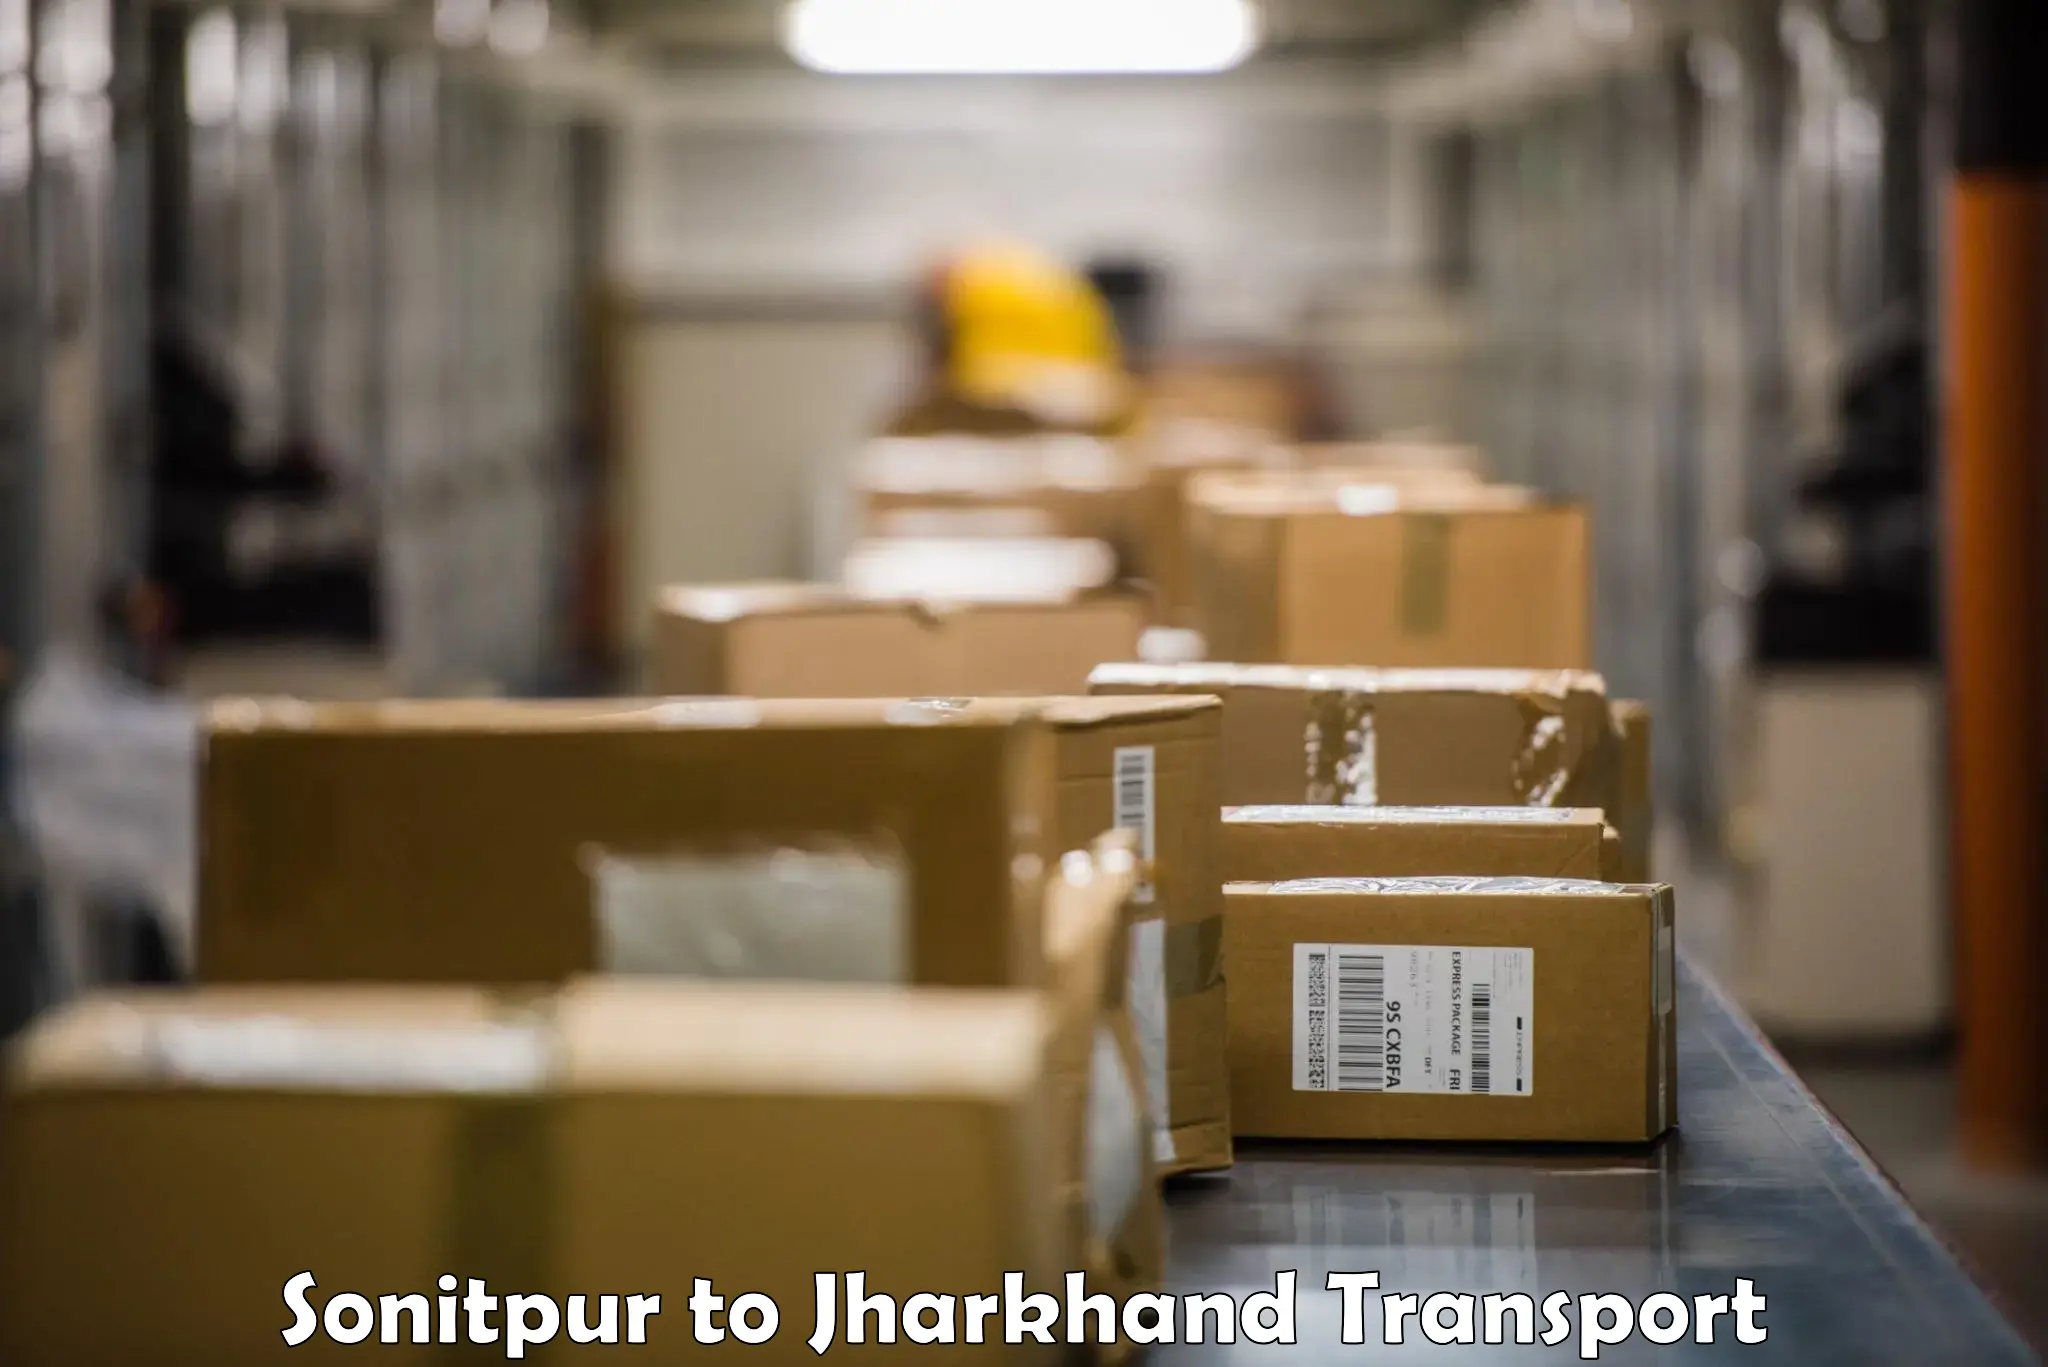 Daily transport service Sonitpur to Tandwa